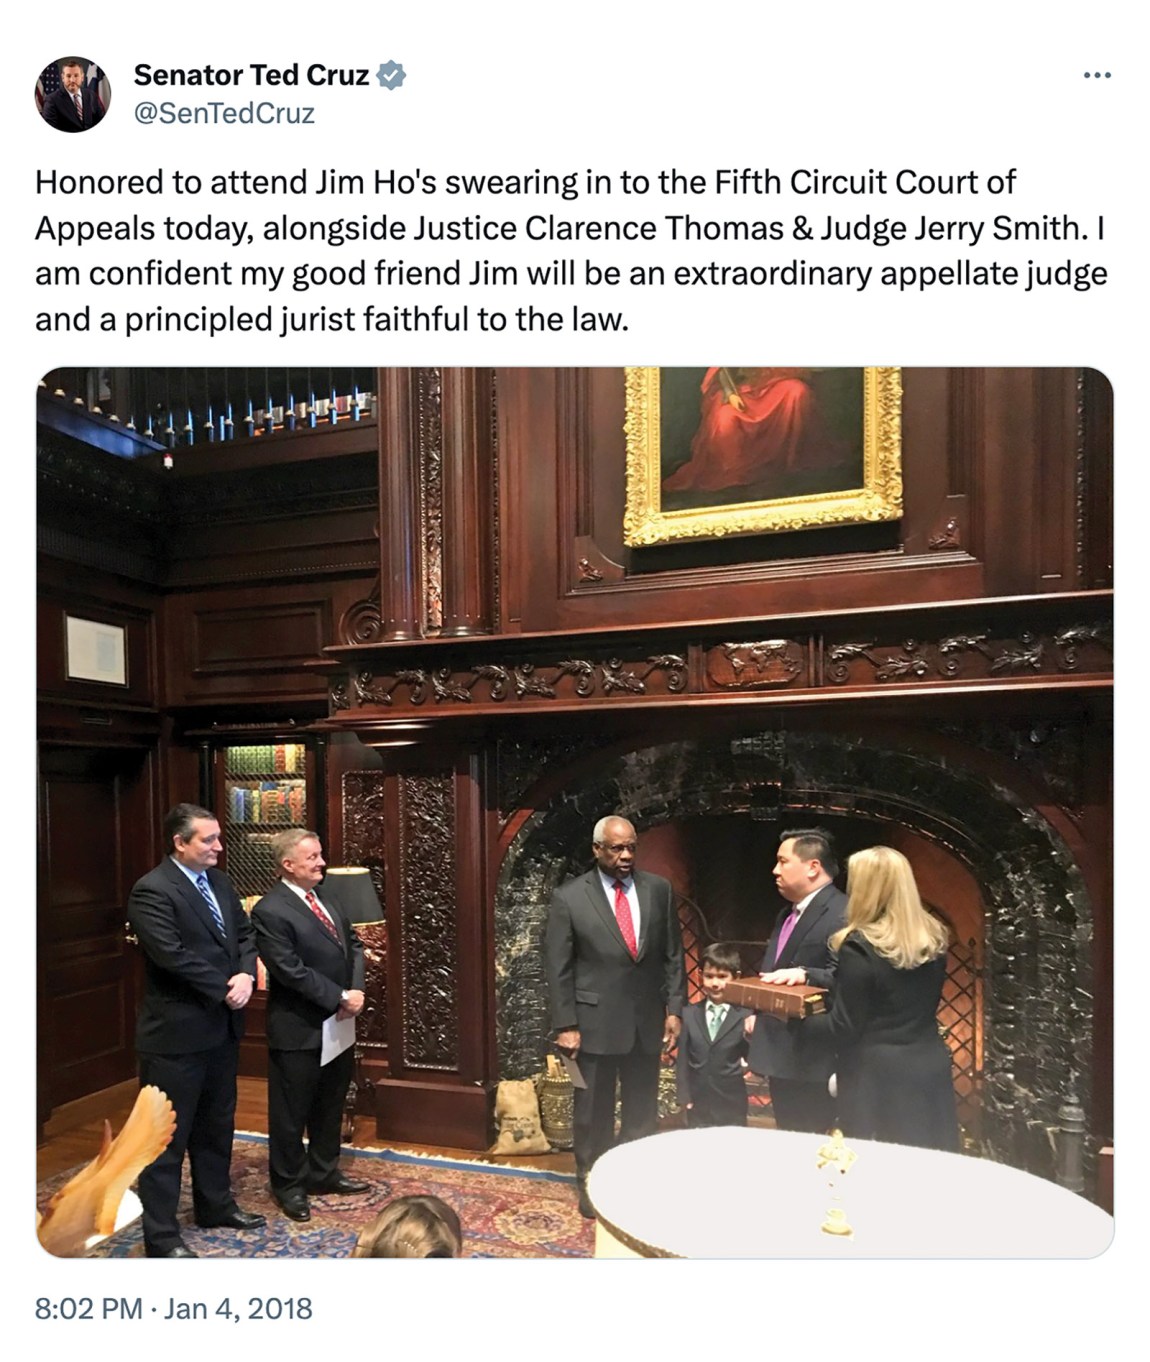 A tweet by Senator Ted Cruz of Texas showing James Ho being sworn in as a judge of the Fifth Circuit Court of Appeals at the home of the billionaire Harlan Crow